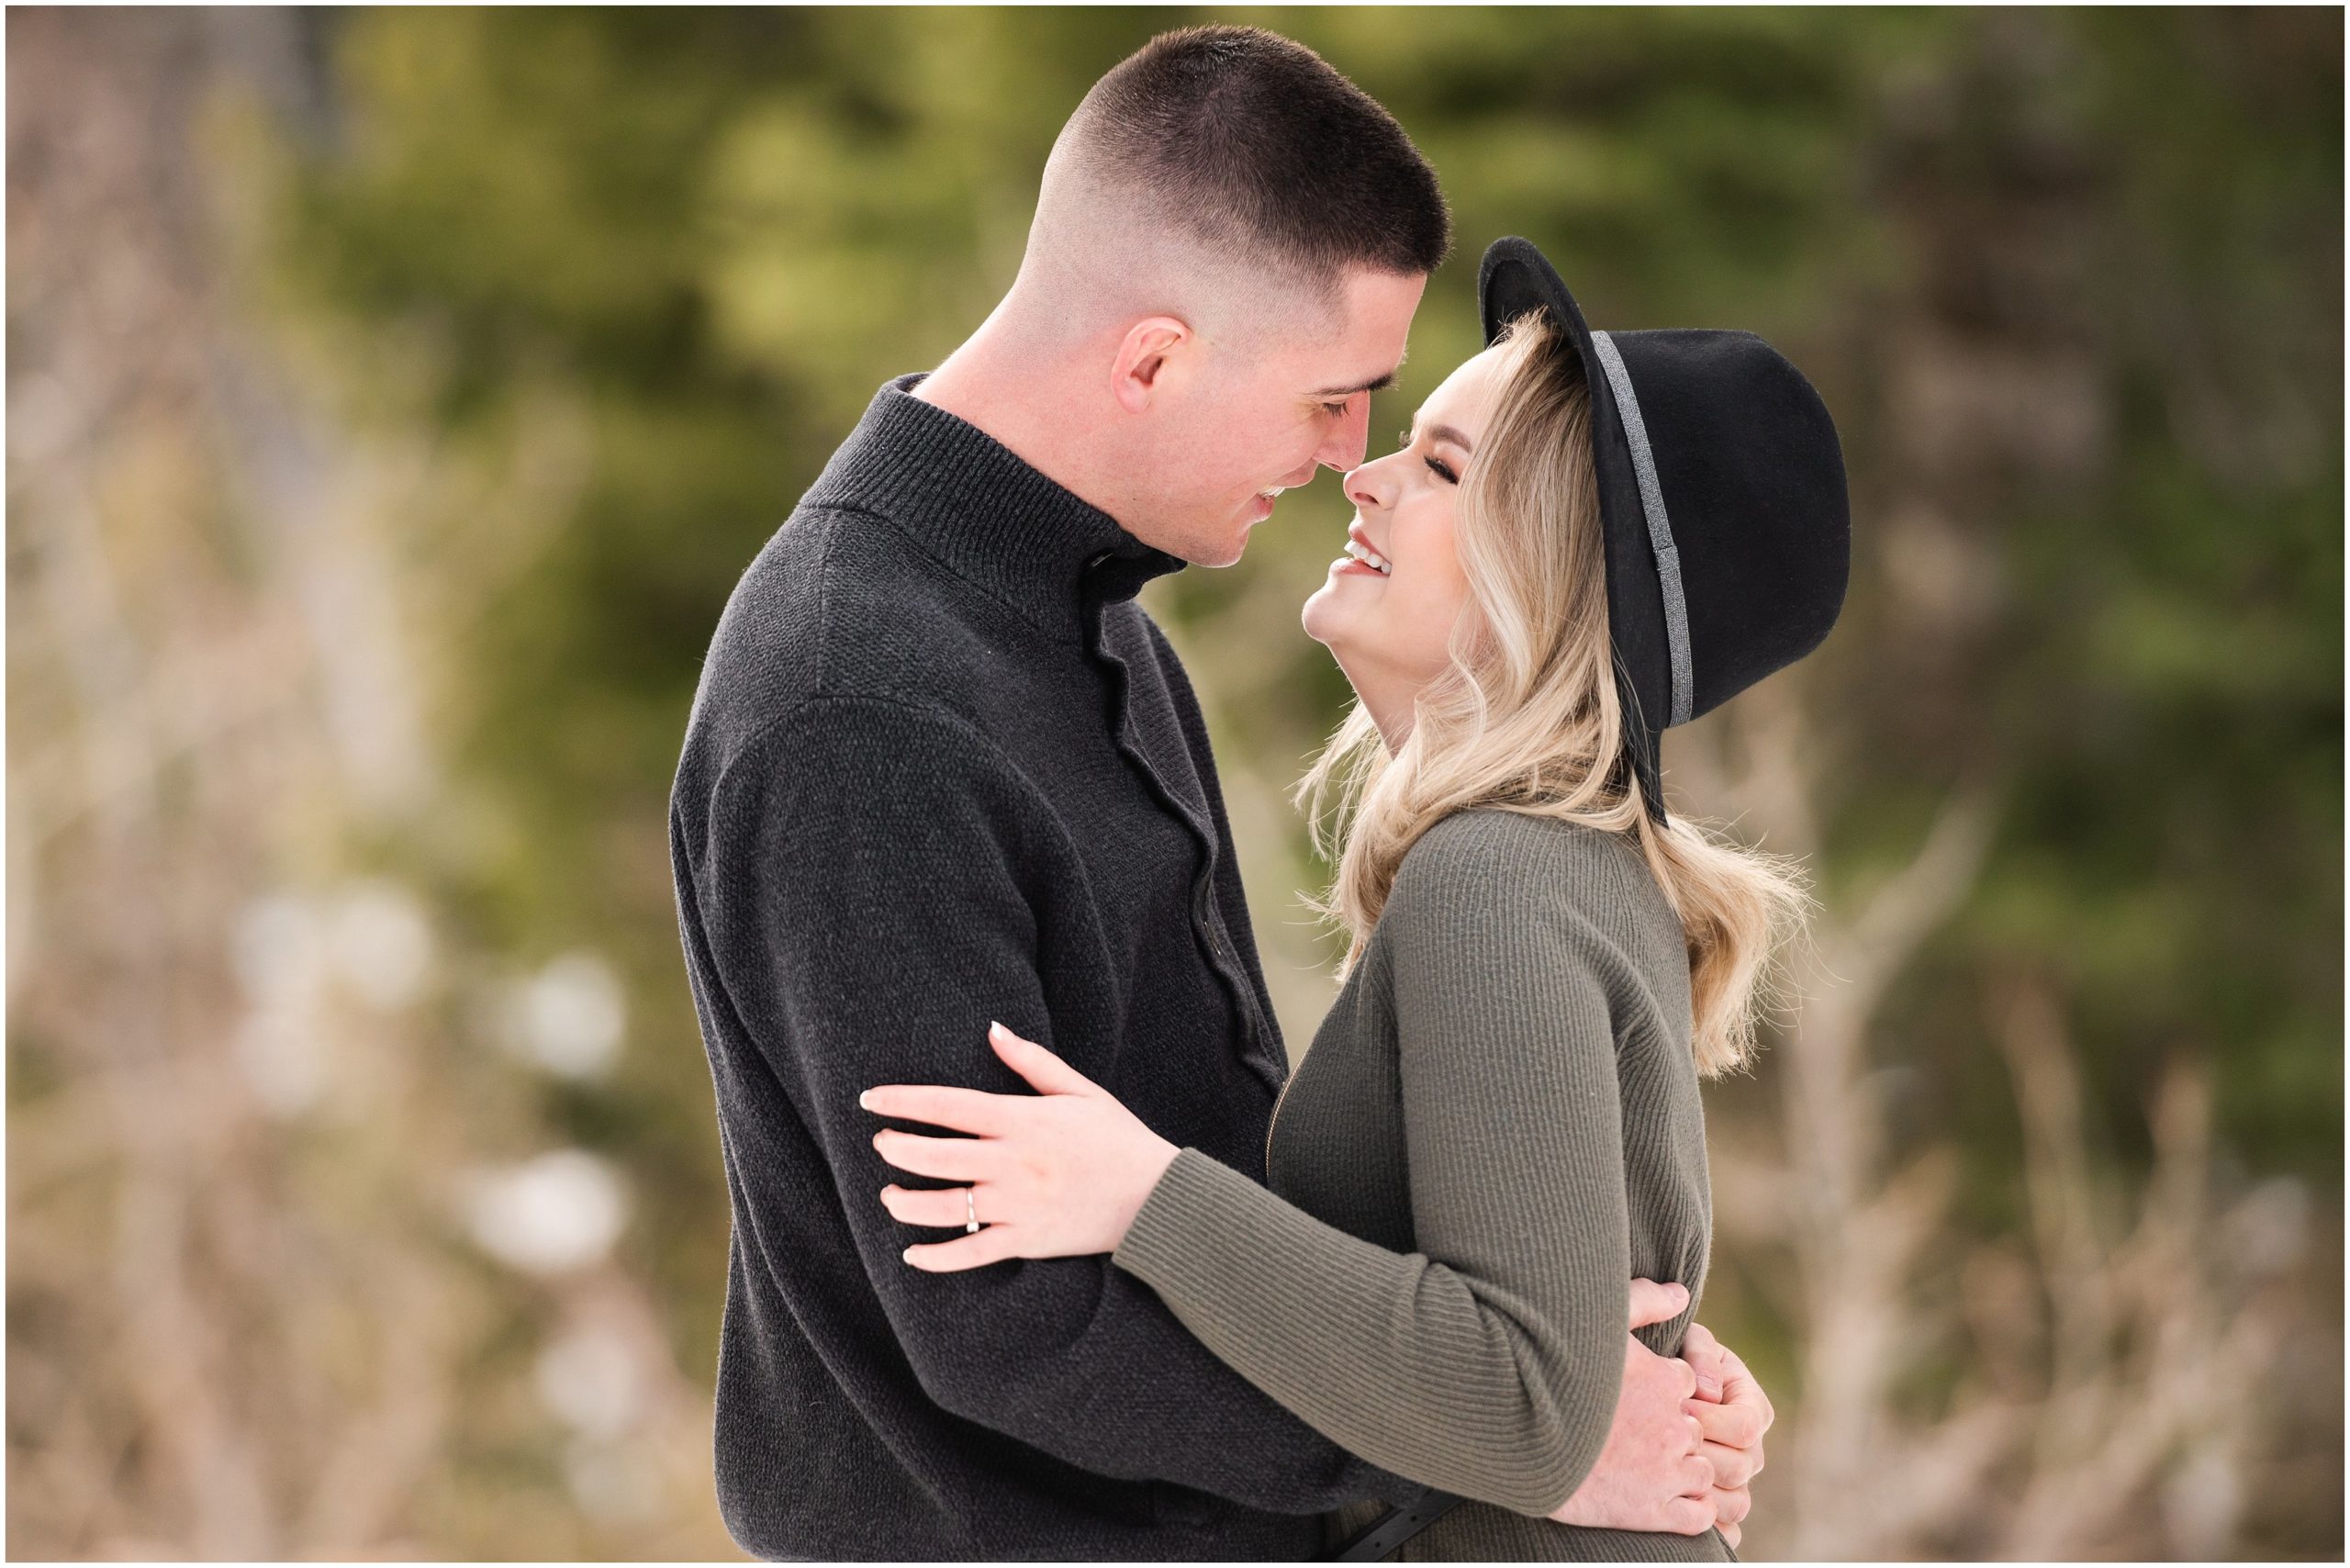 Couple in the snow during mountain destination engagement session in Utah | Wearing olive colored dress with black floppy hat and black sweater and black pants | Snowbasin Resort Snowy Engagement Session | Jessie and Dallin Photography